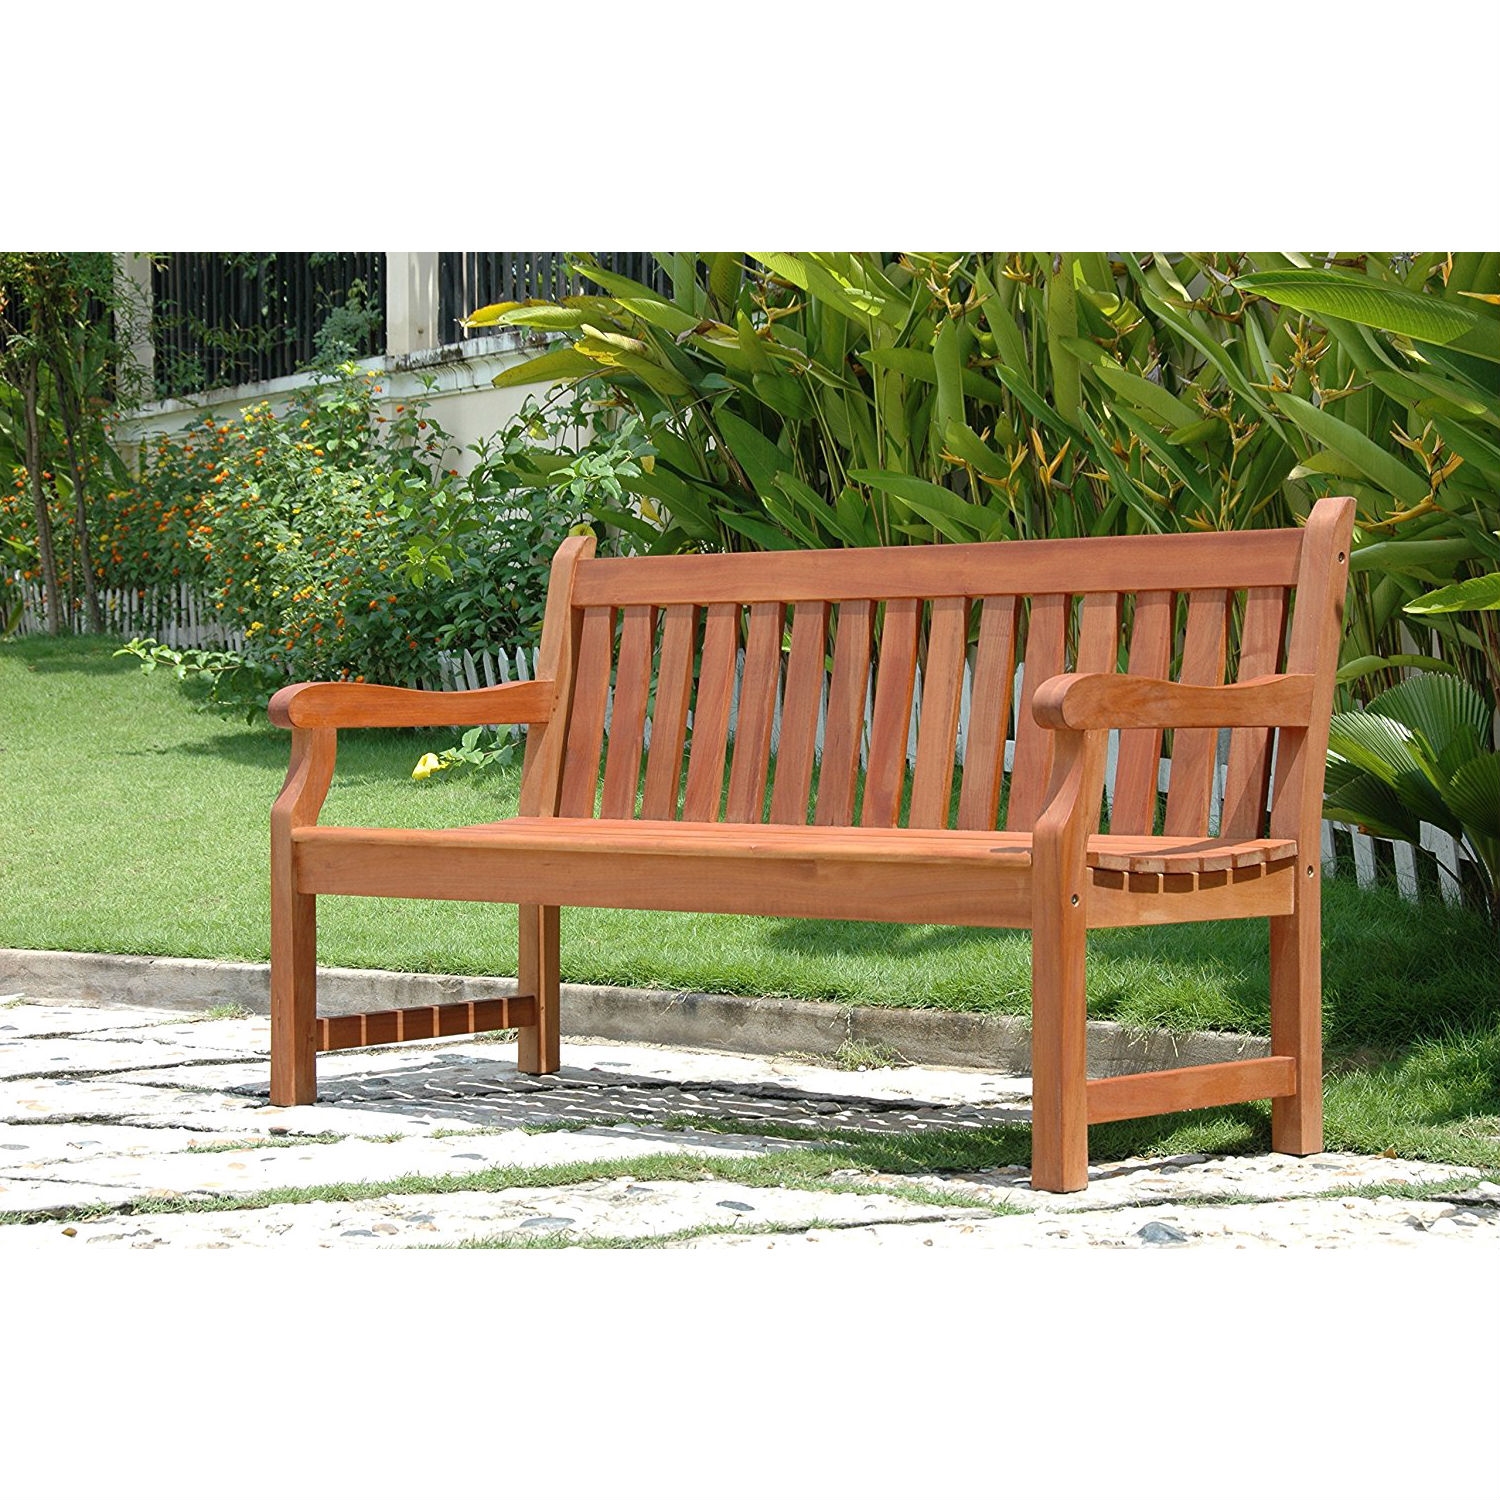 Outdoor Eucalyptus Wood 5-Ft Garden Bench with Natural Finish ...